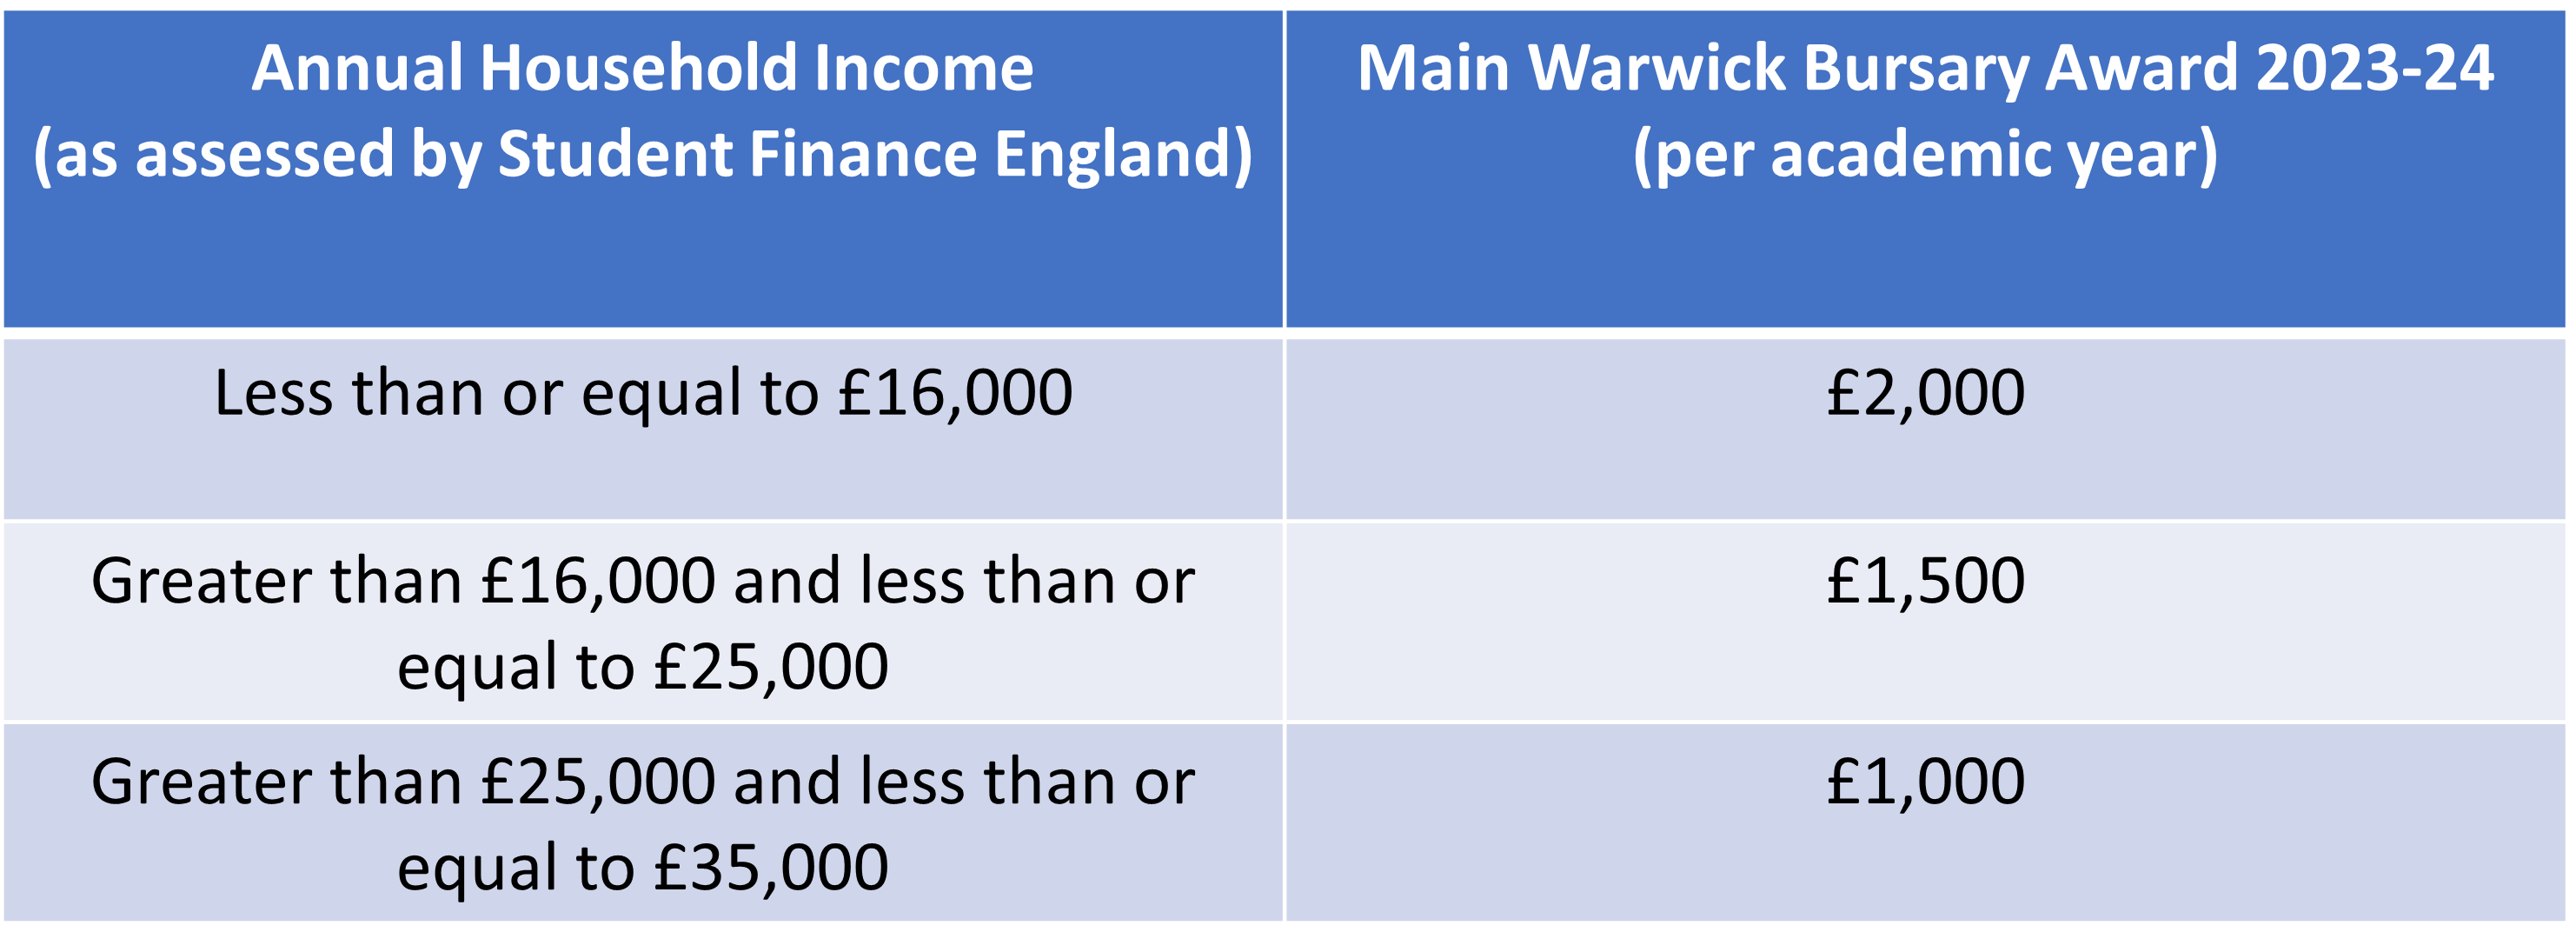 A table demonstrating the amount of award available to eligible students in 2023-2024 from the Warwick Bursary, depending on household income (as assessed by Student Finance England).